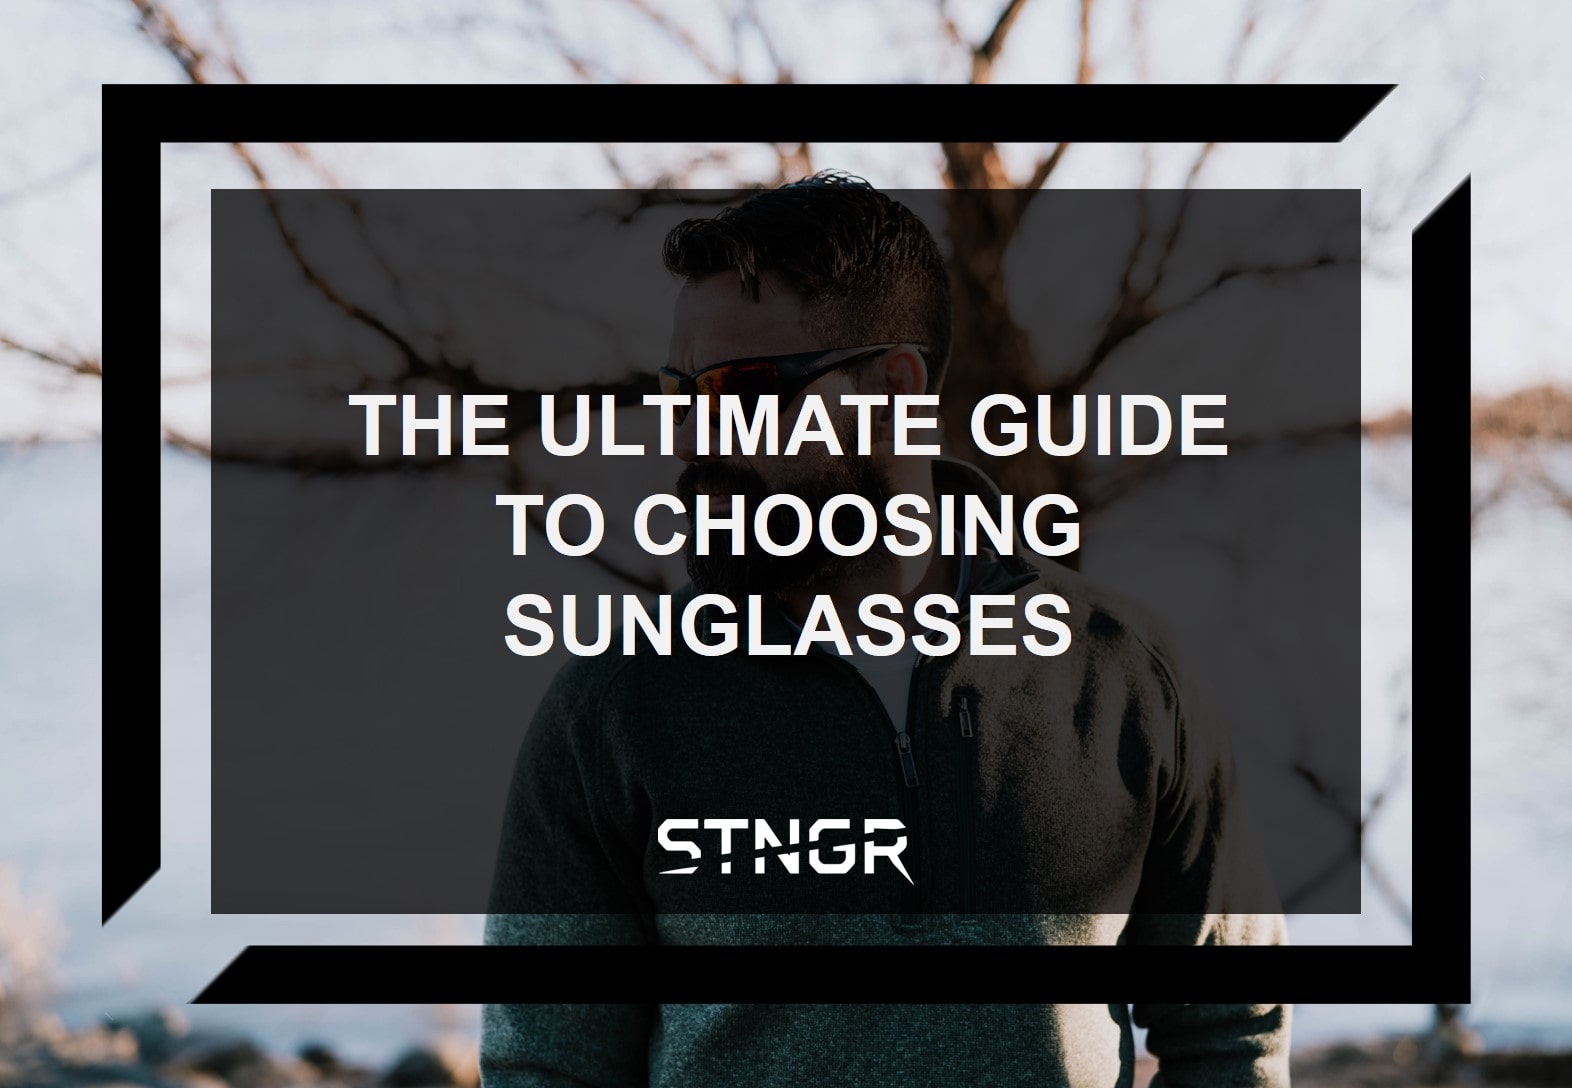 The Ultimate Guide to Choosing Sunglasses